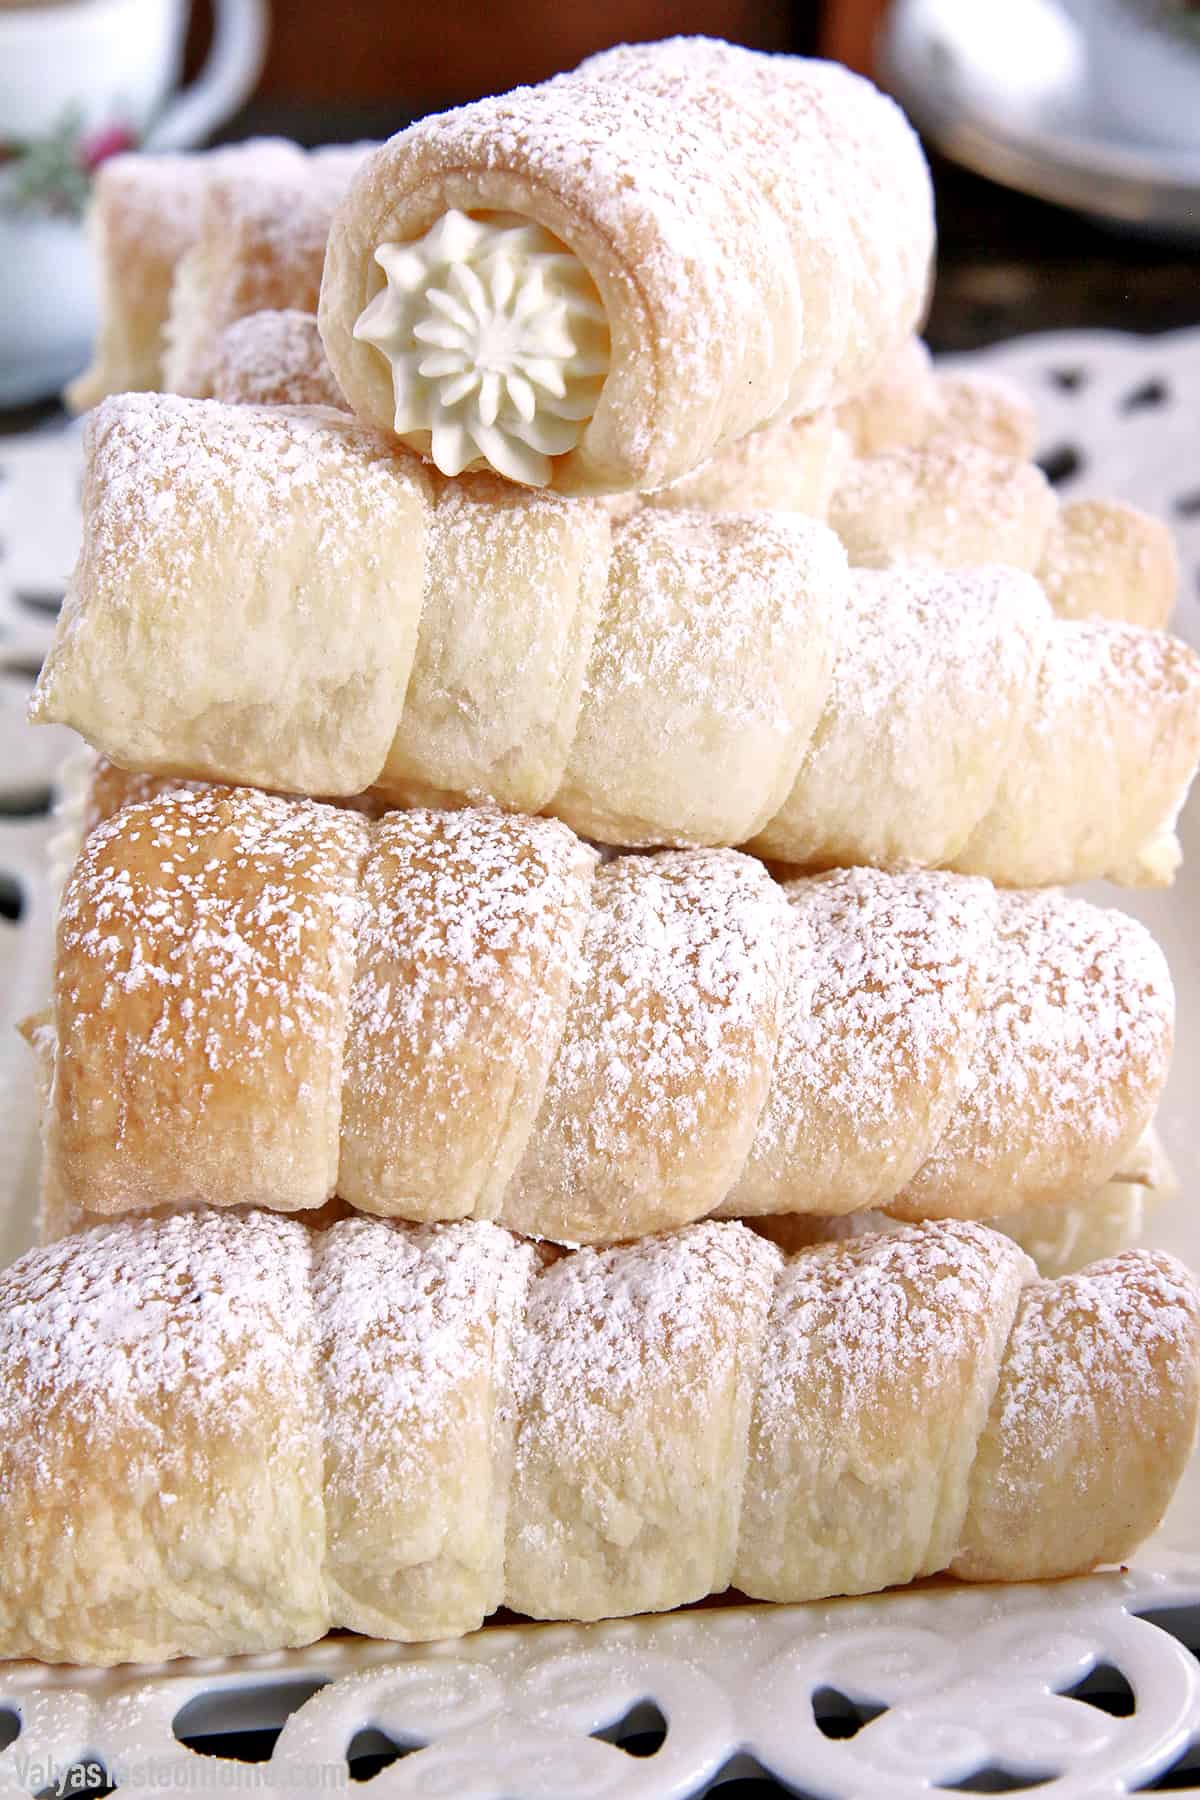 Making cream horns at home seems difficult at first, but with a little practice, it can turn out beautifully. These scrumptious Mom's Cream Horns are super easy to put together and terrific fun to eat!